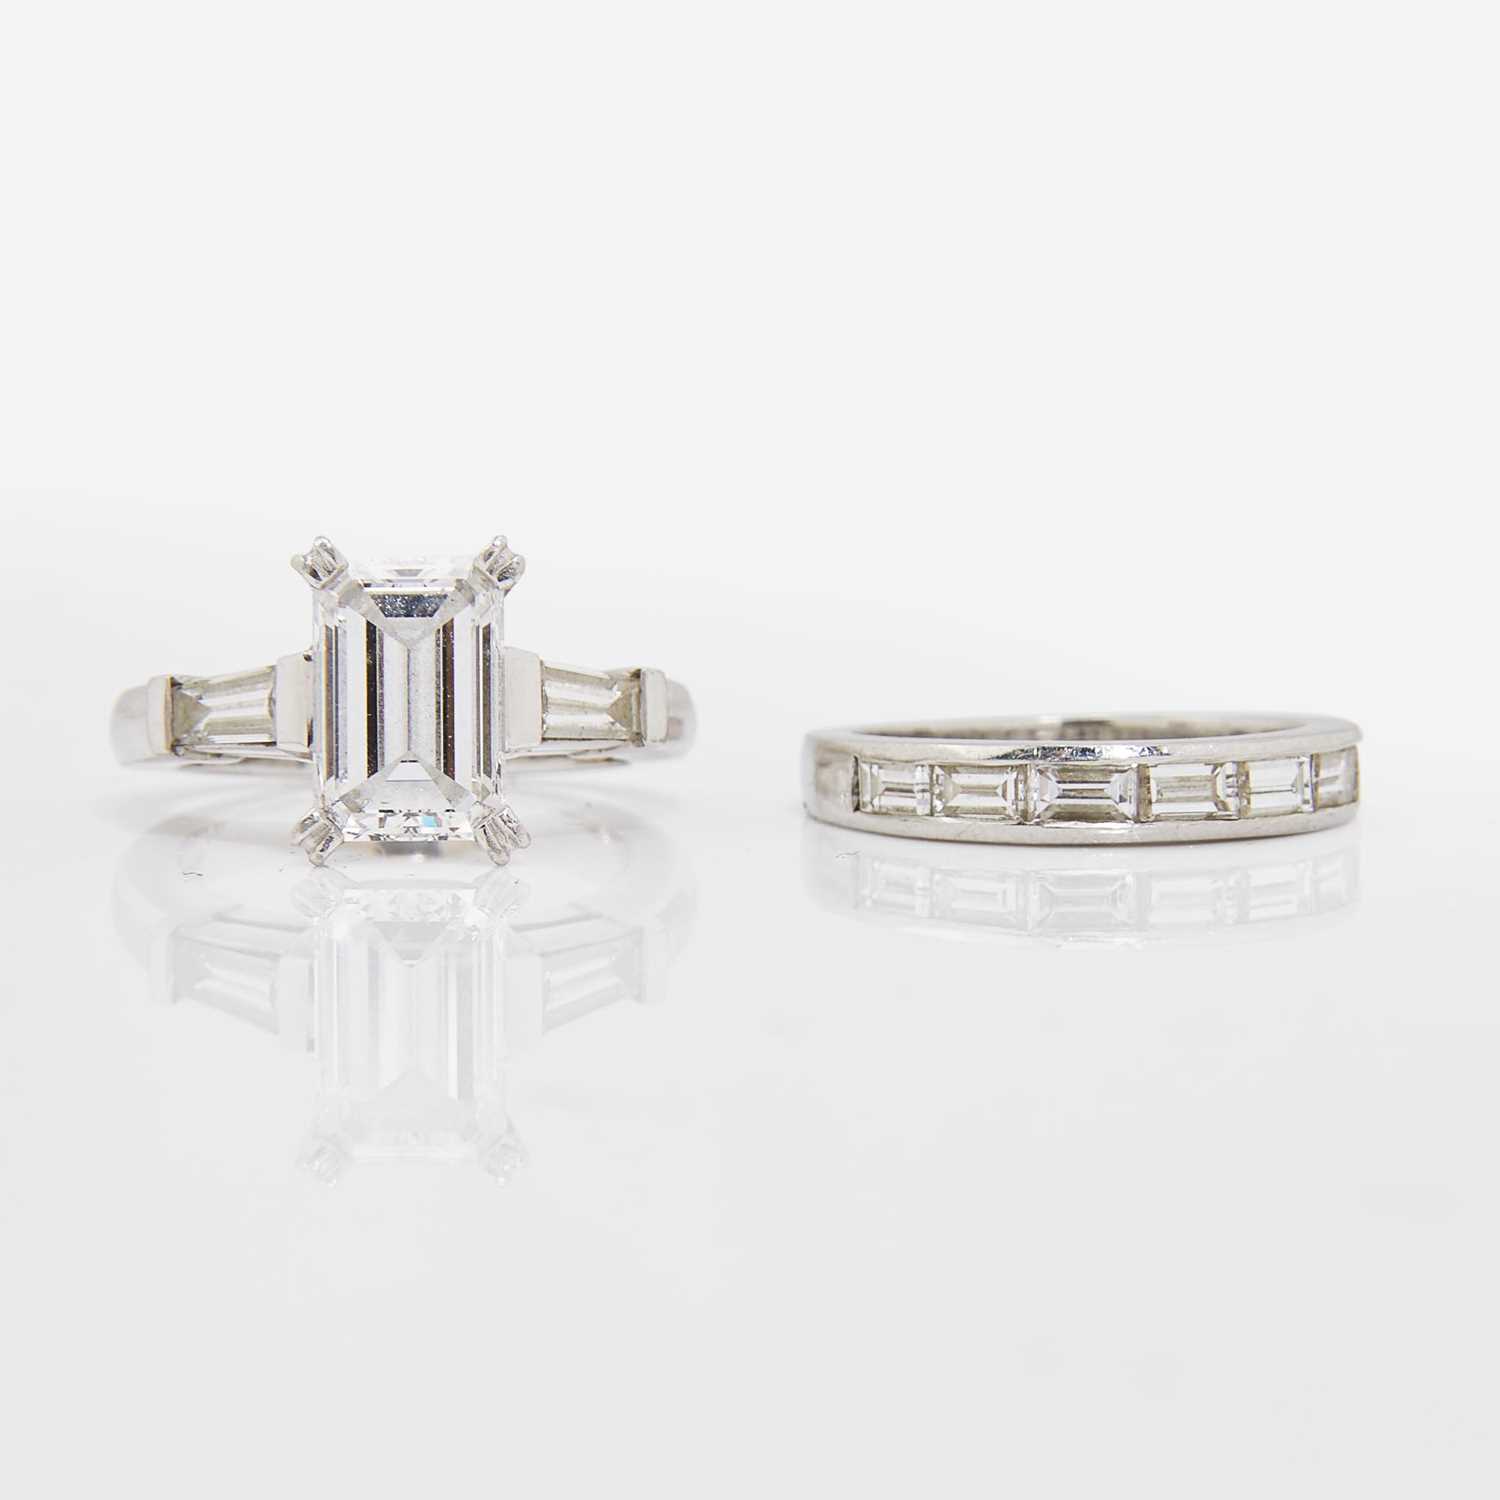 Lot 58 - An Emerald-Cut Diamond and Platinum Ring and Band